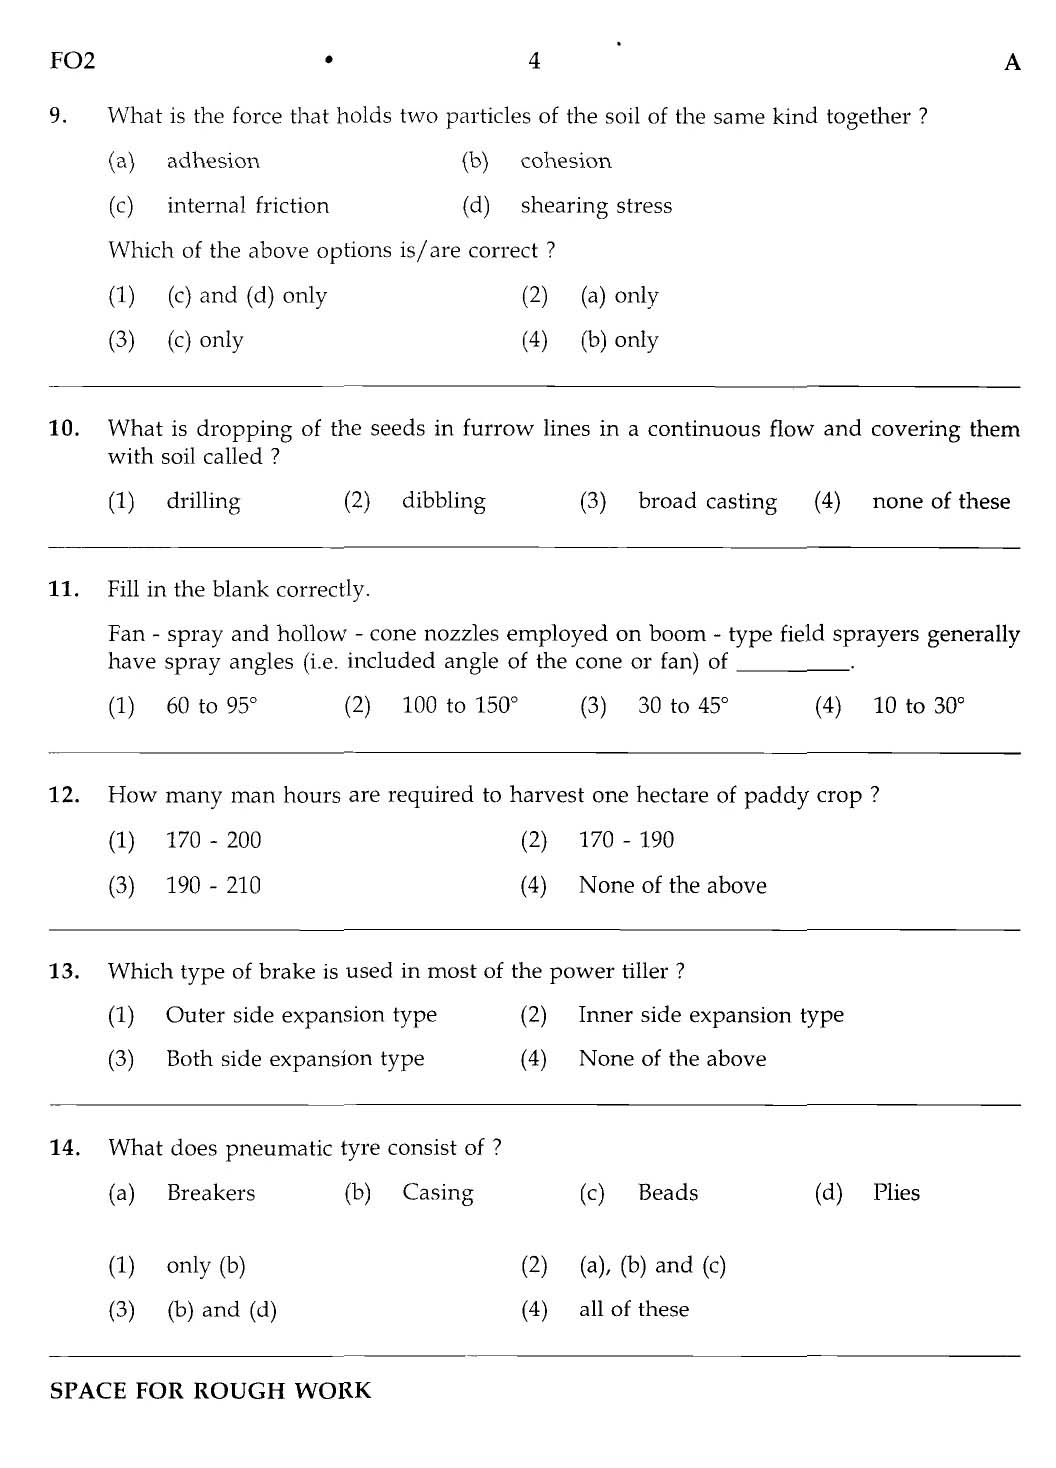 MPSC Agricultural Services Main Exam 2012 Question Paper Agricultural Engineering 3